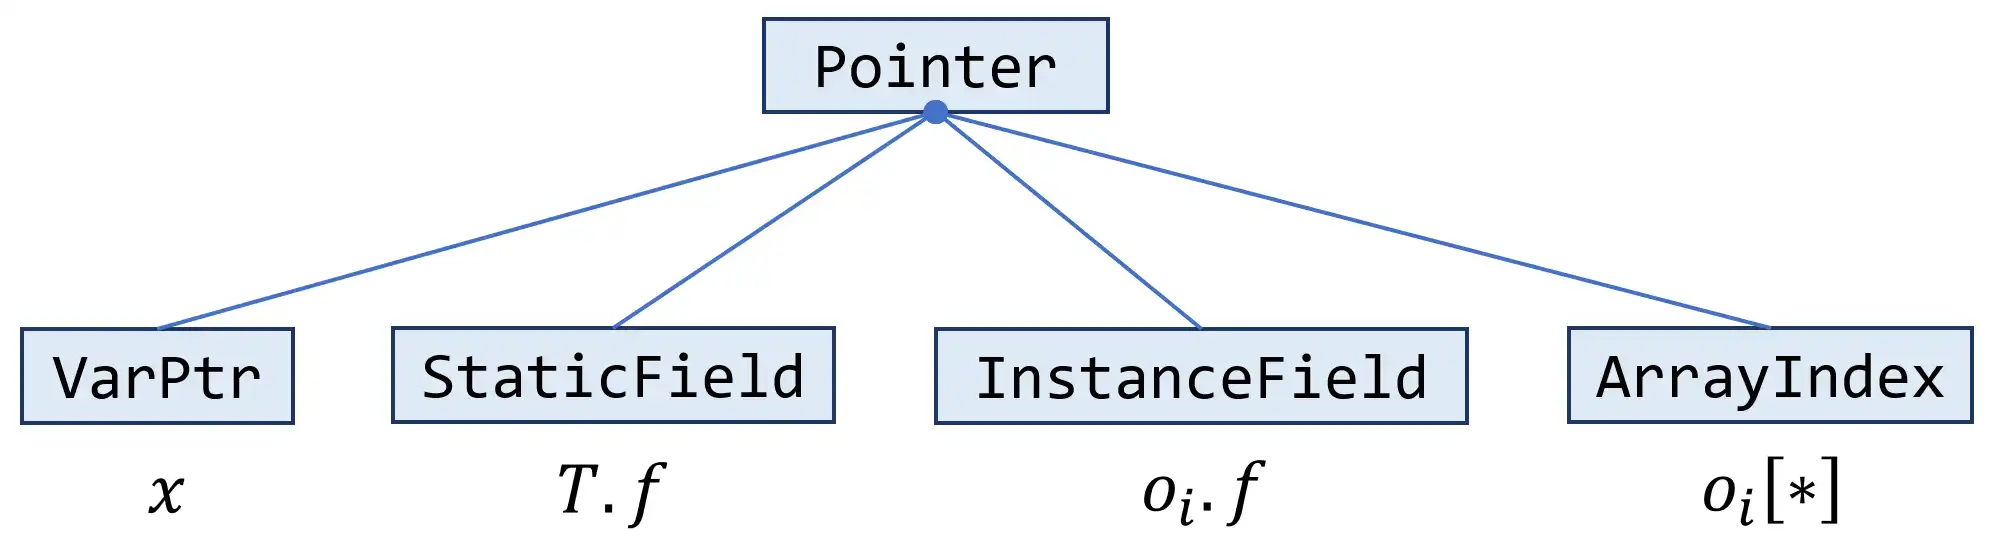 Subclasses of Pointer